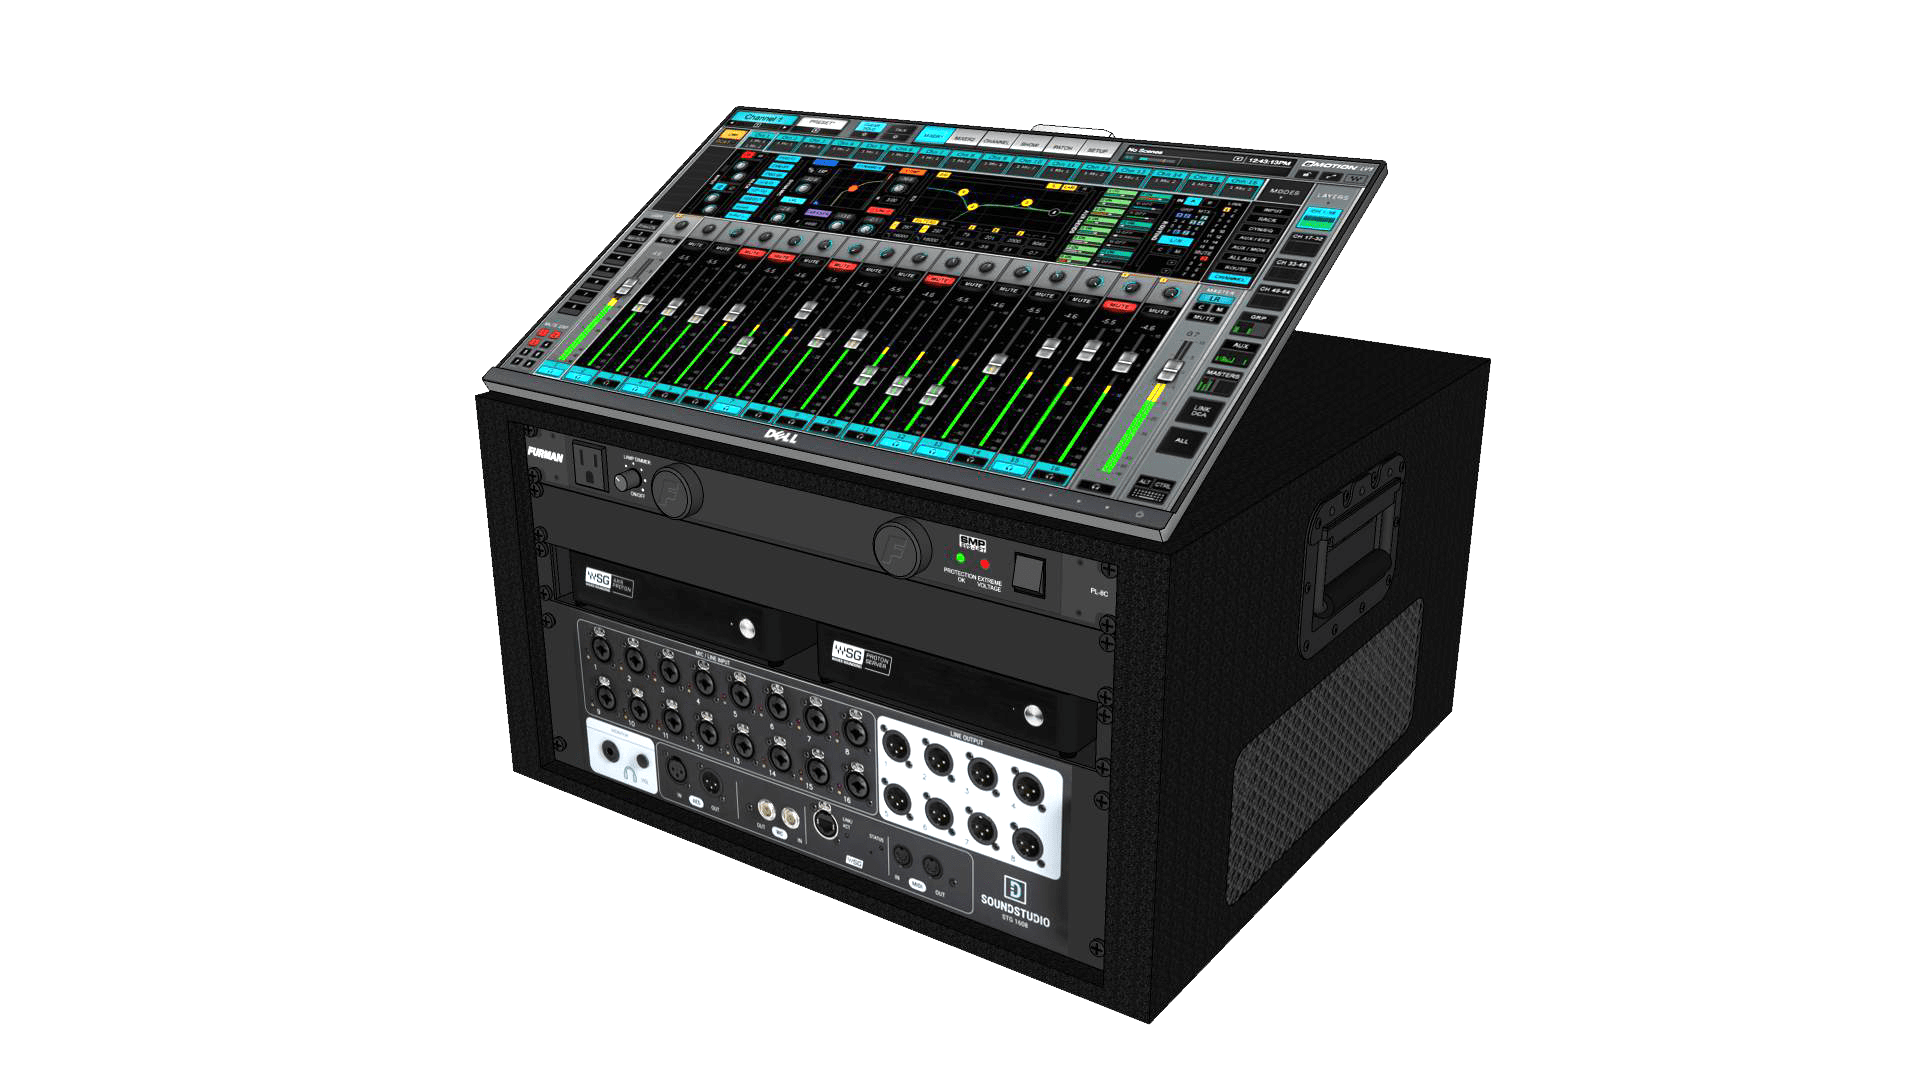 Waves eMotion LV1 16-channel Complete Live Mixing System with Axis One,  Impact-C Server, & STG-1608